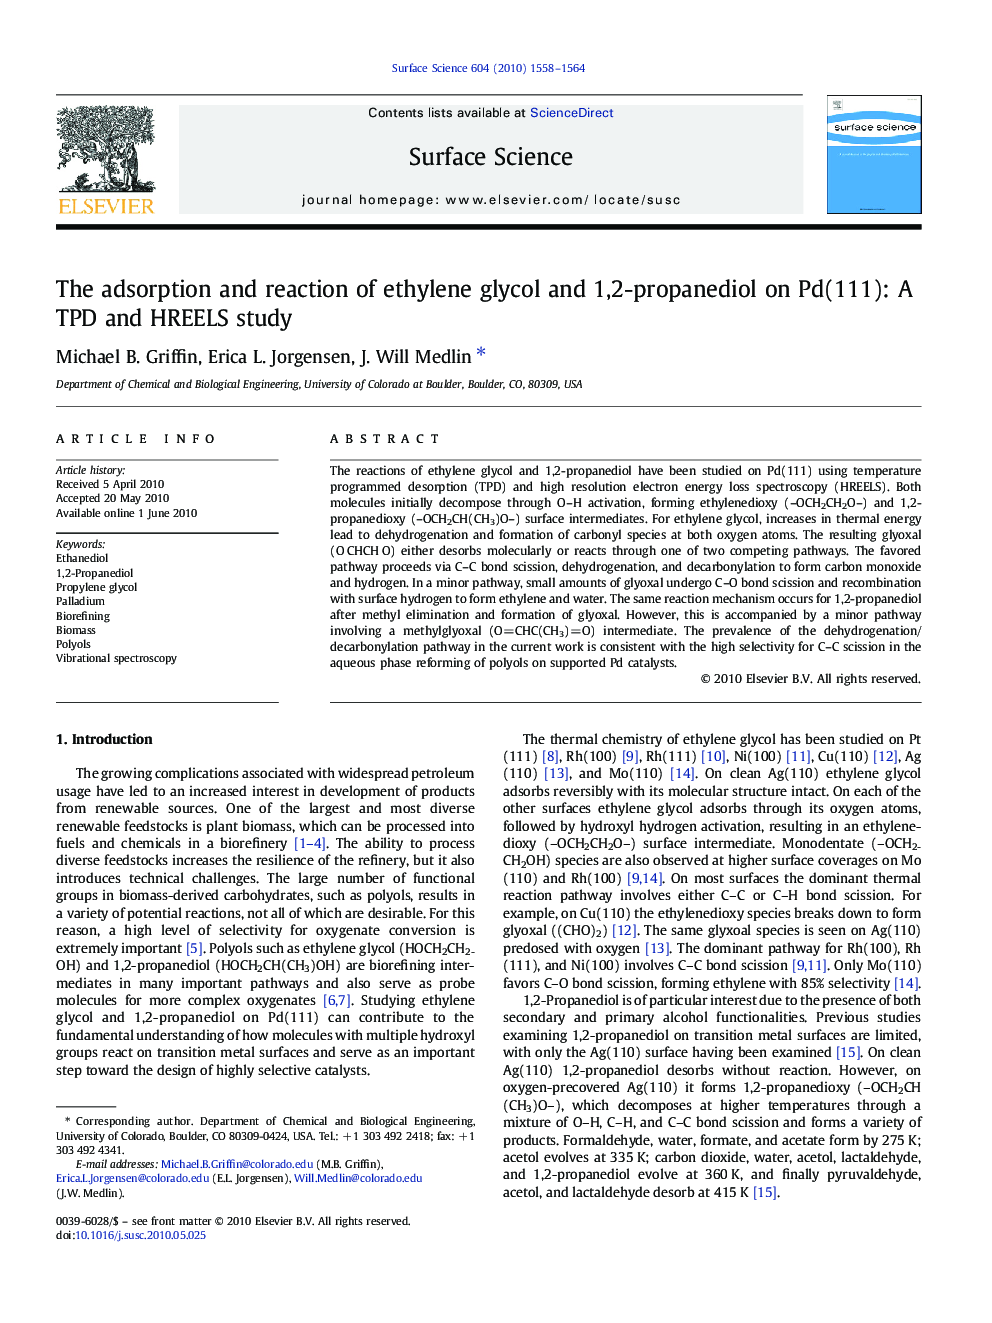 The adsorption and reaction of ethylene glycol and 1,2-propanediol on Pd(111): A TPD and HREELS study